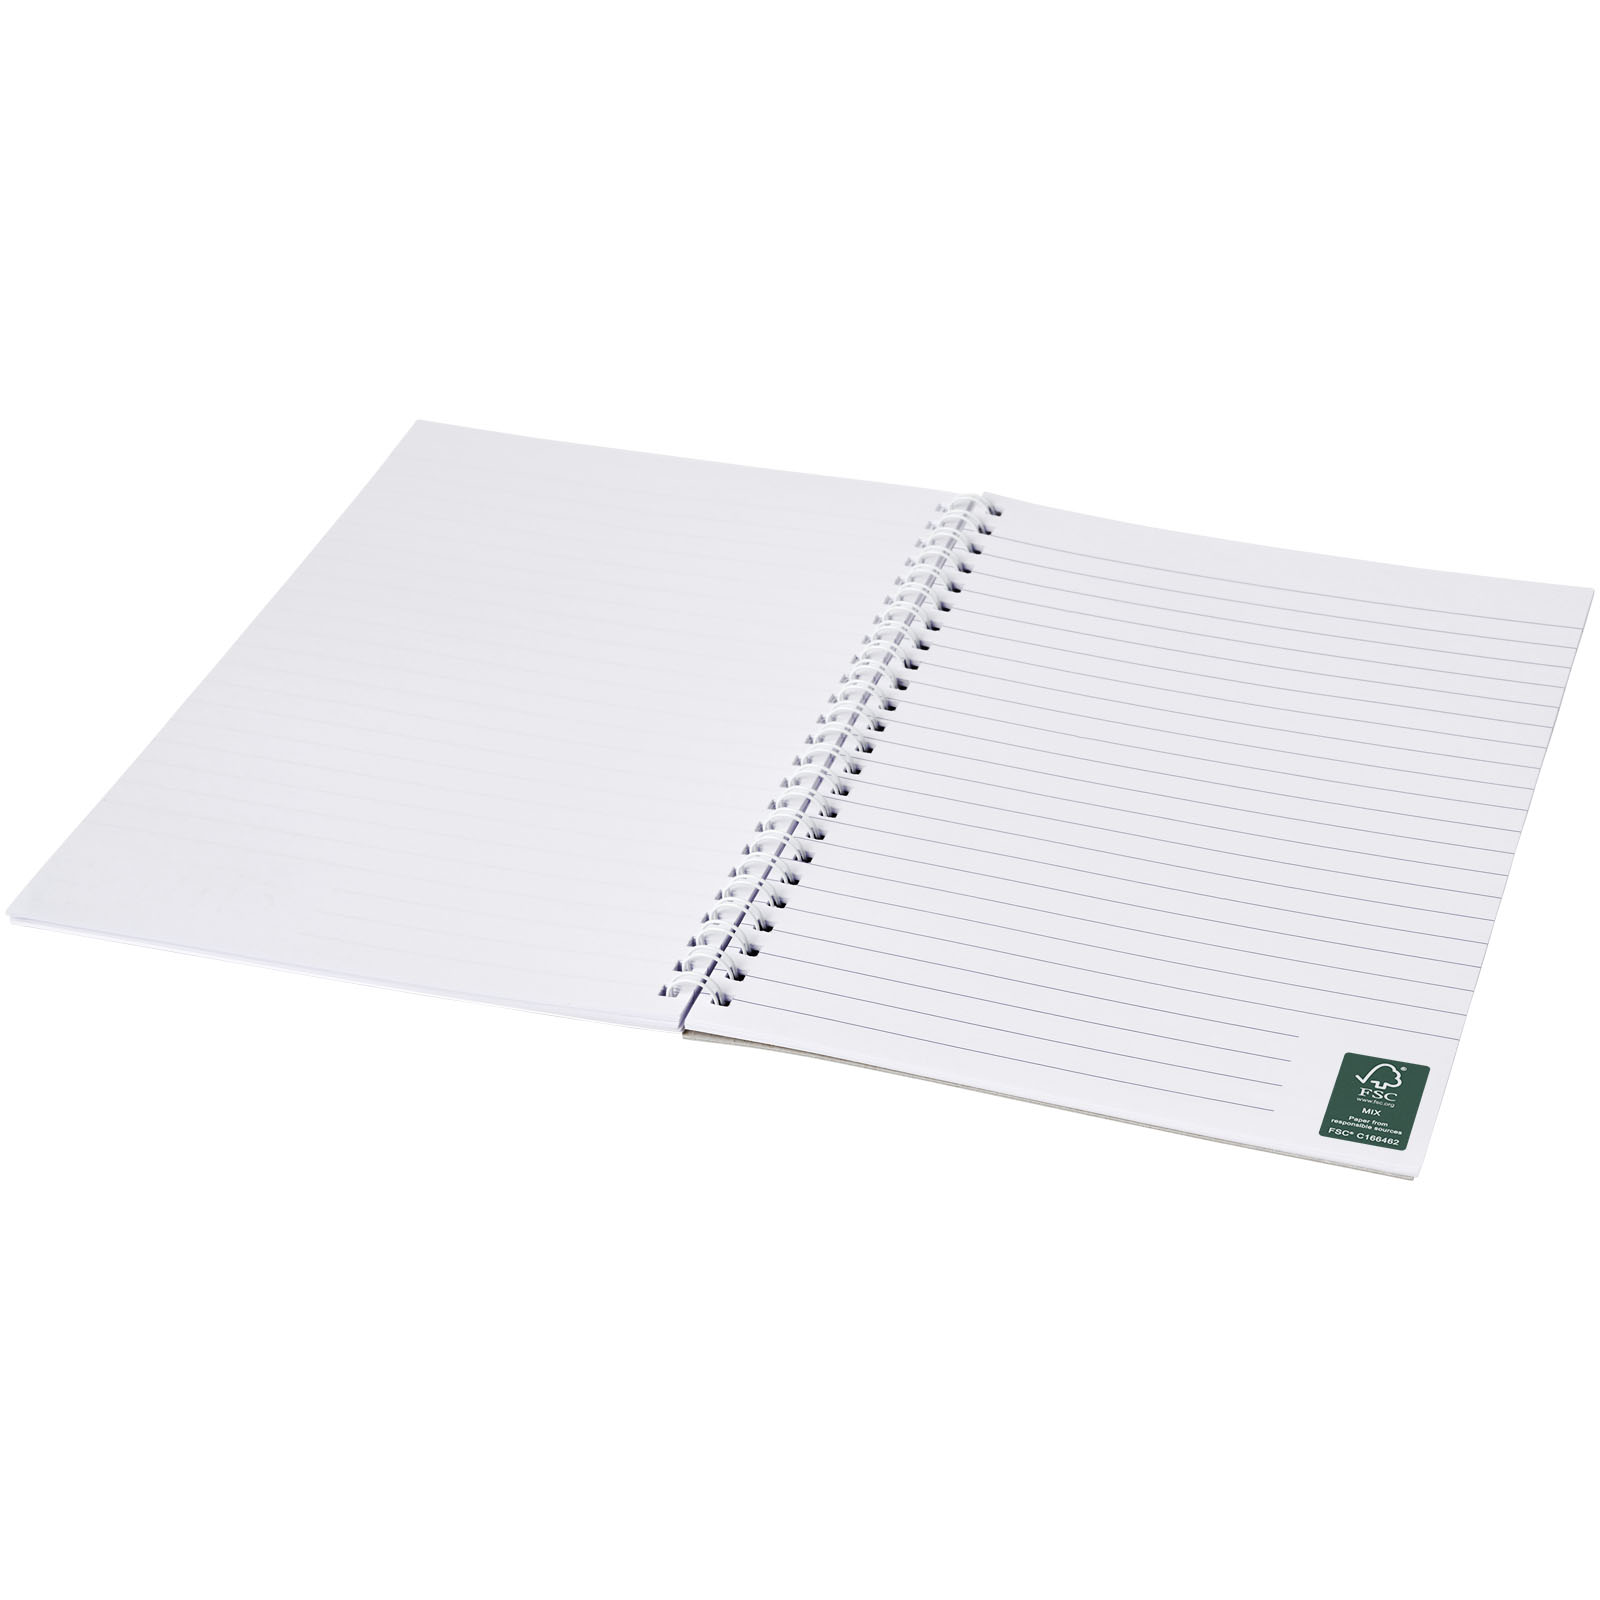 Advertising Soft cover notebooks - Desk-Mate® A4 spiral notebook with printed back cover - 3